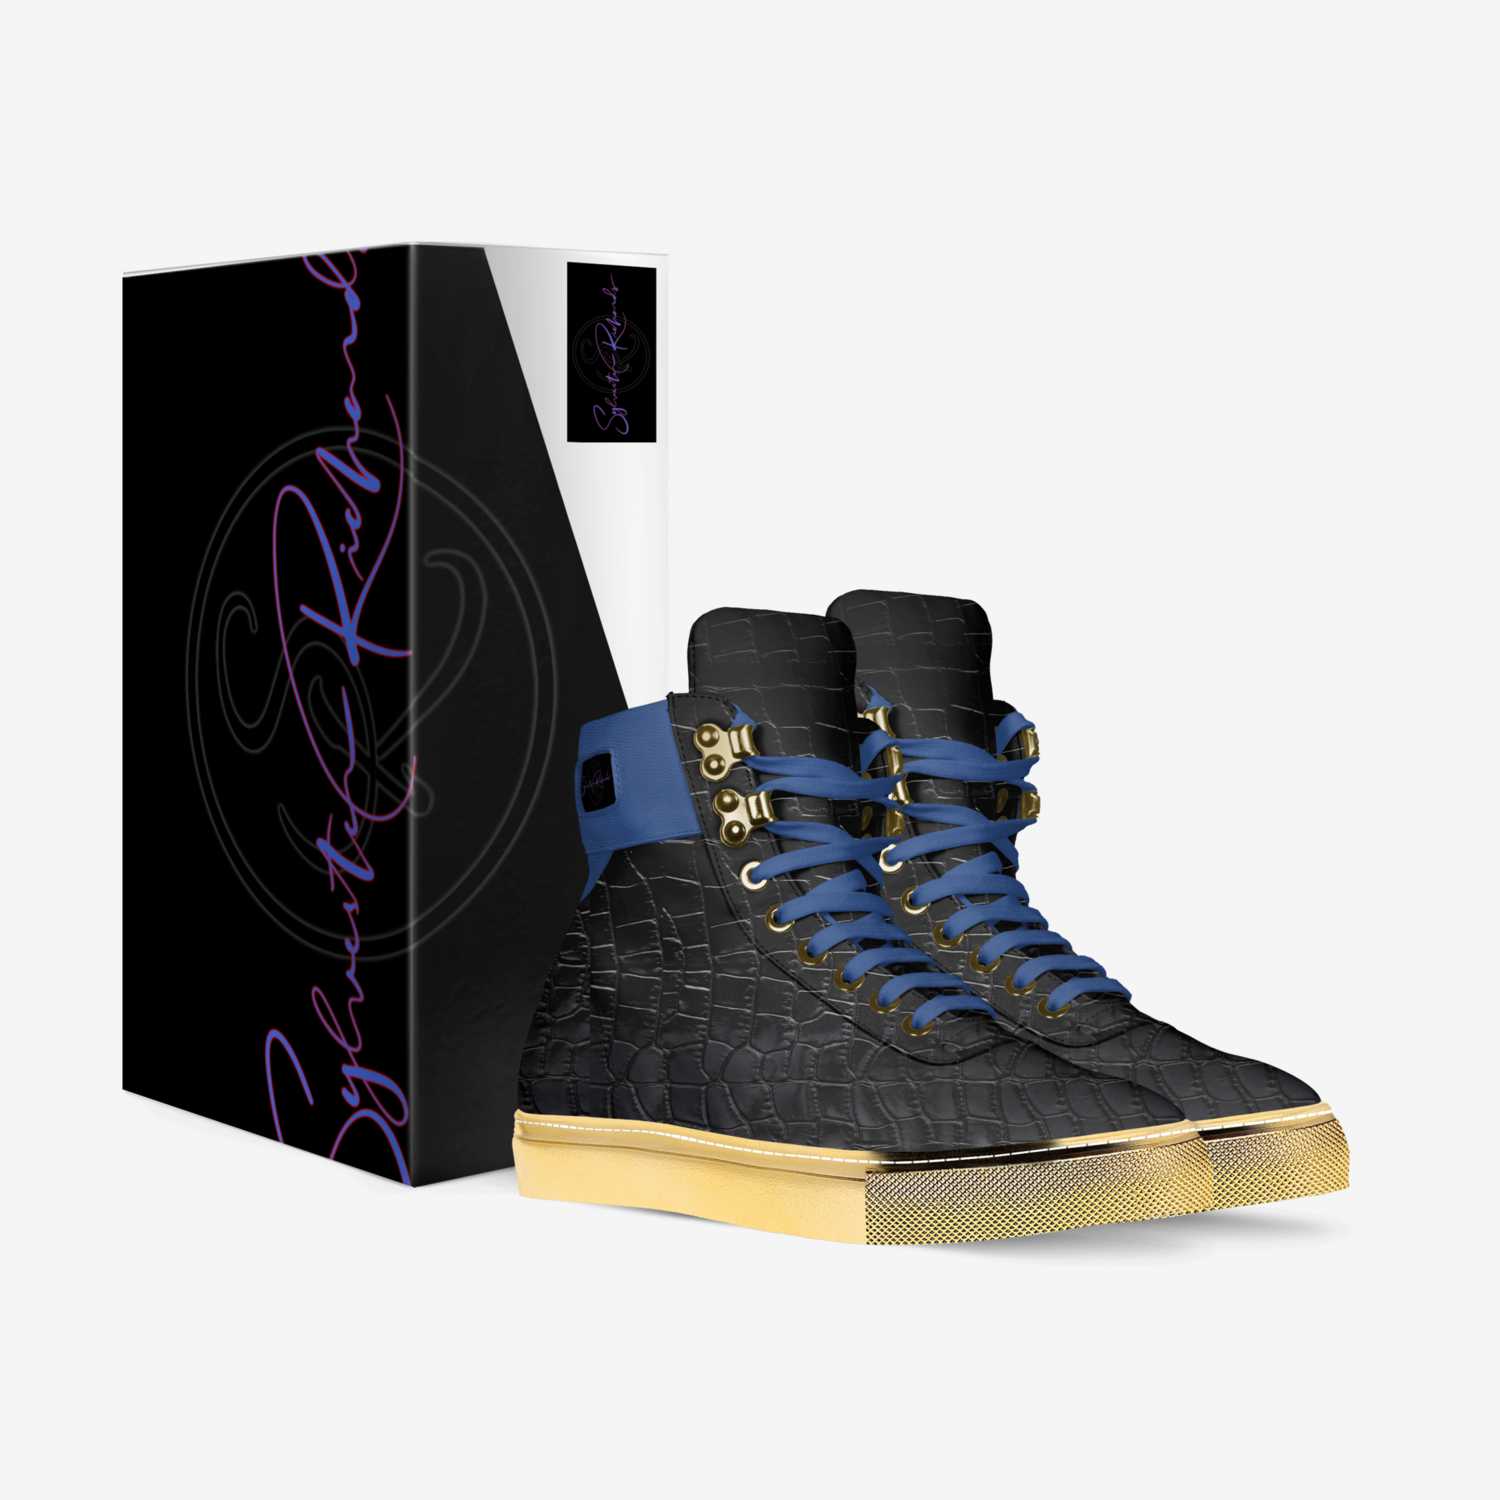 Sylvester Richards custom made in Italy shoes by Byron Johnson | Box view